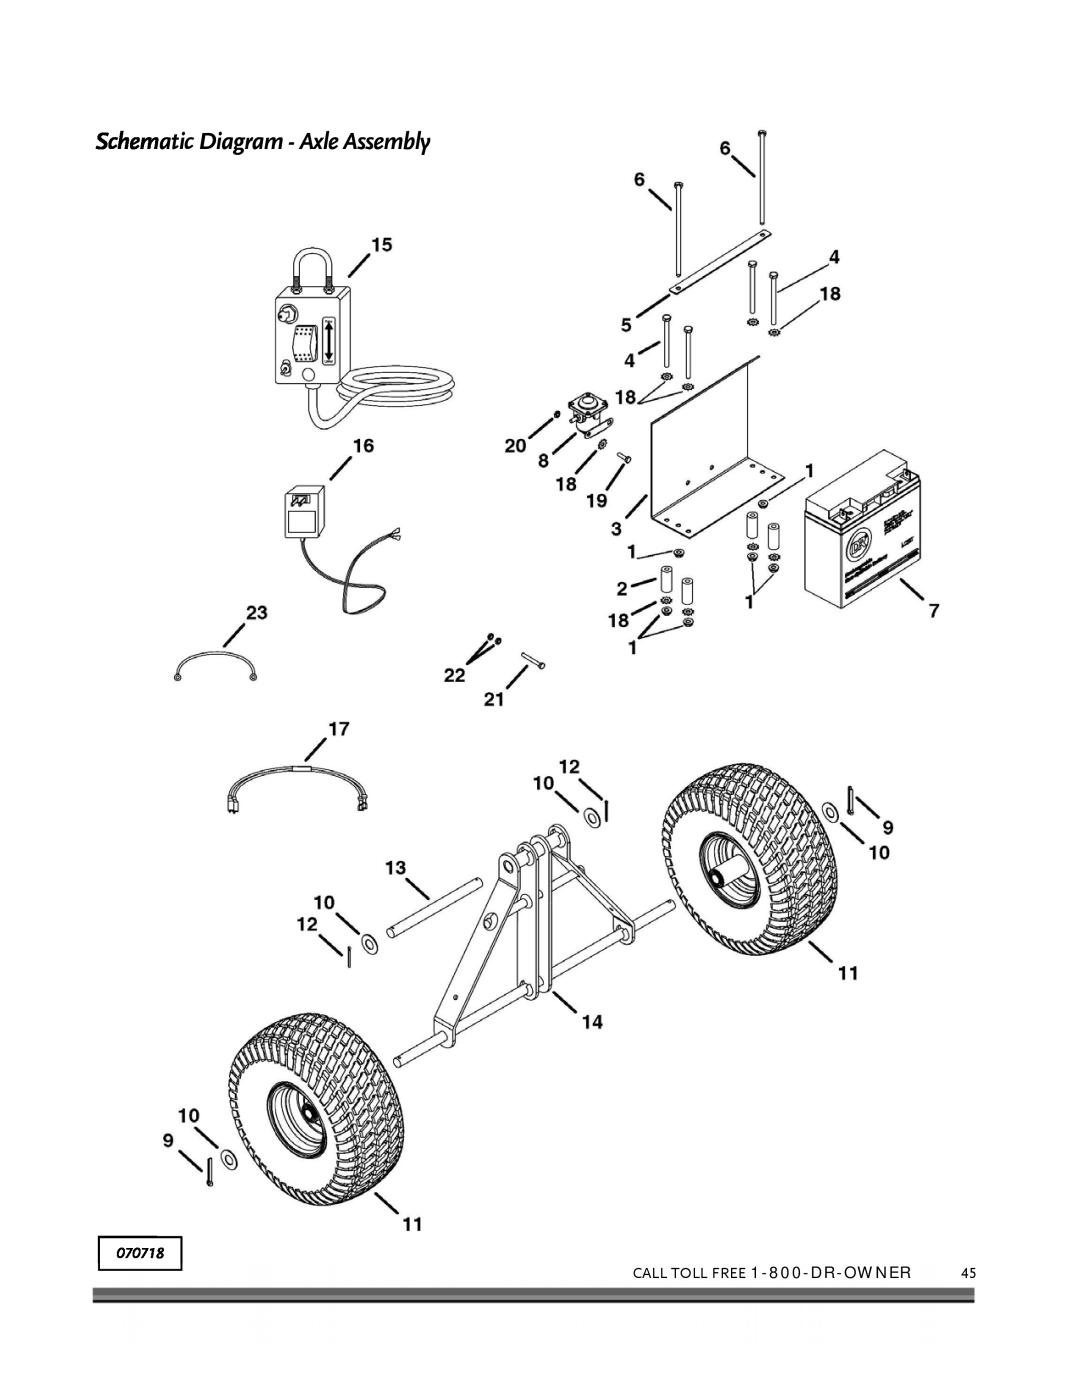 Country Home Products ROTO-HOGTM manual Schematic Diagram - Axle Assembly, 070718, CALL TOLL FREE 1-800-DR-OWNER 